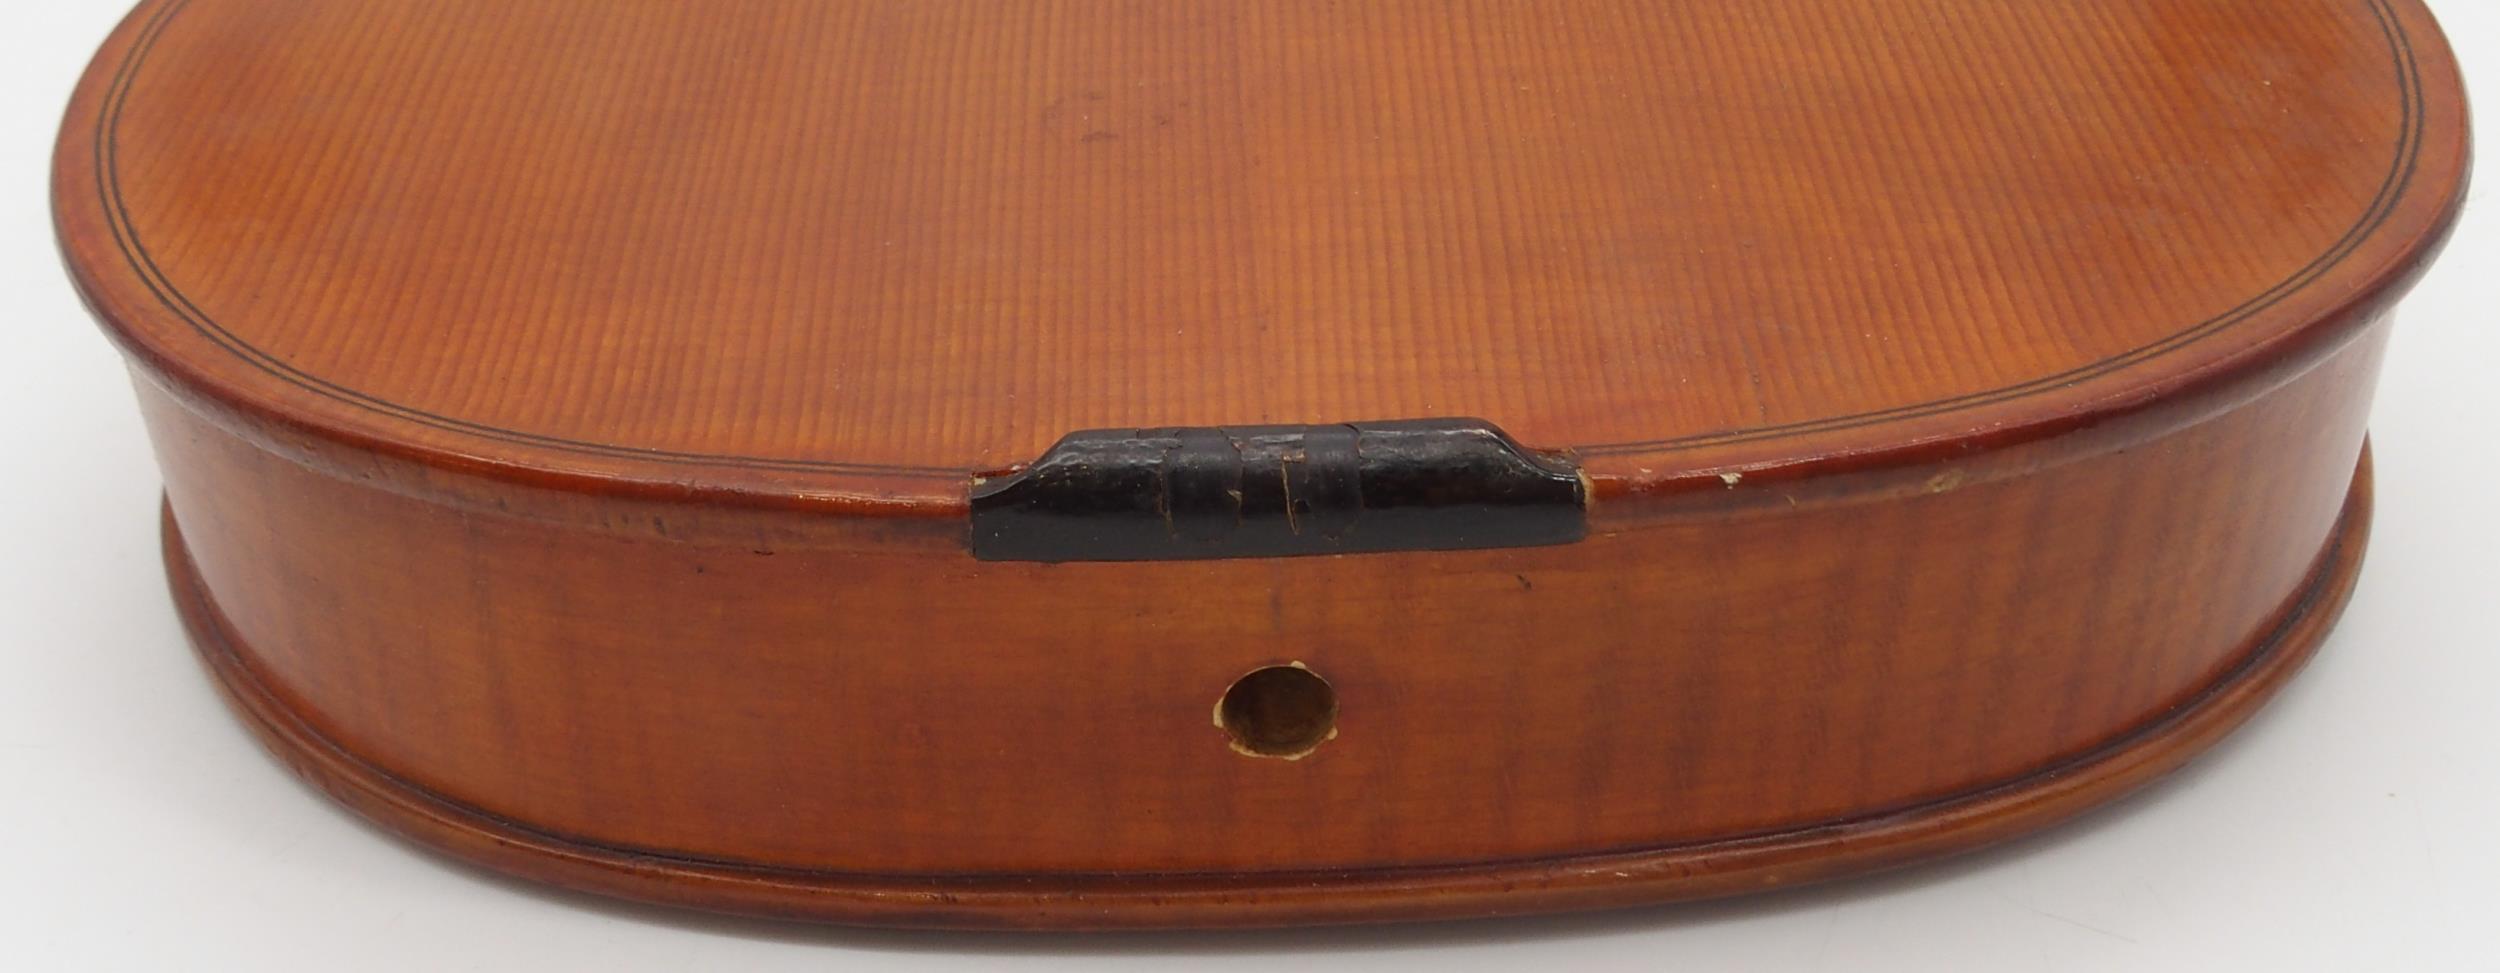 Alexander Youngson a one piece back violin 35.5cm bearing label with inscription to the interior - Image 8 of 10